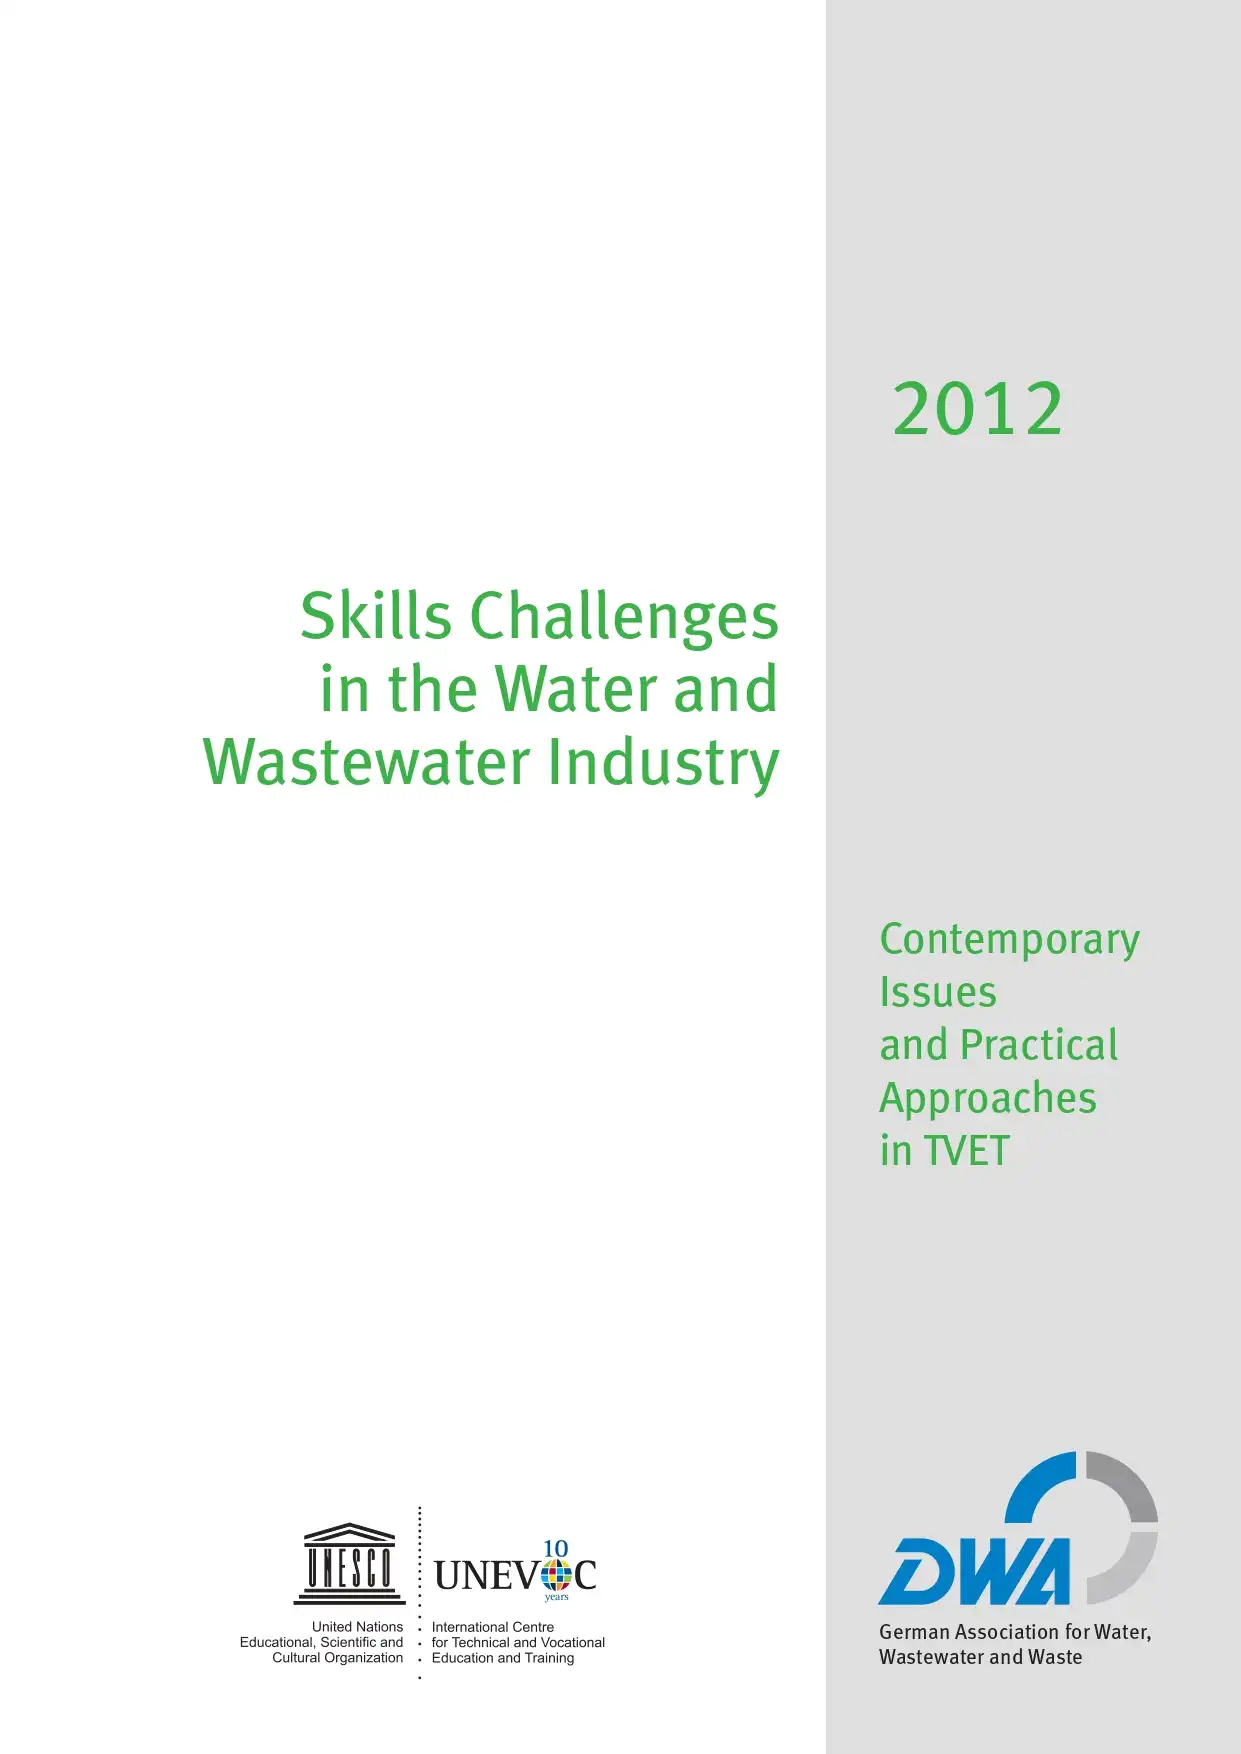 Skills Challenges in the Water and Wastewater Industry